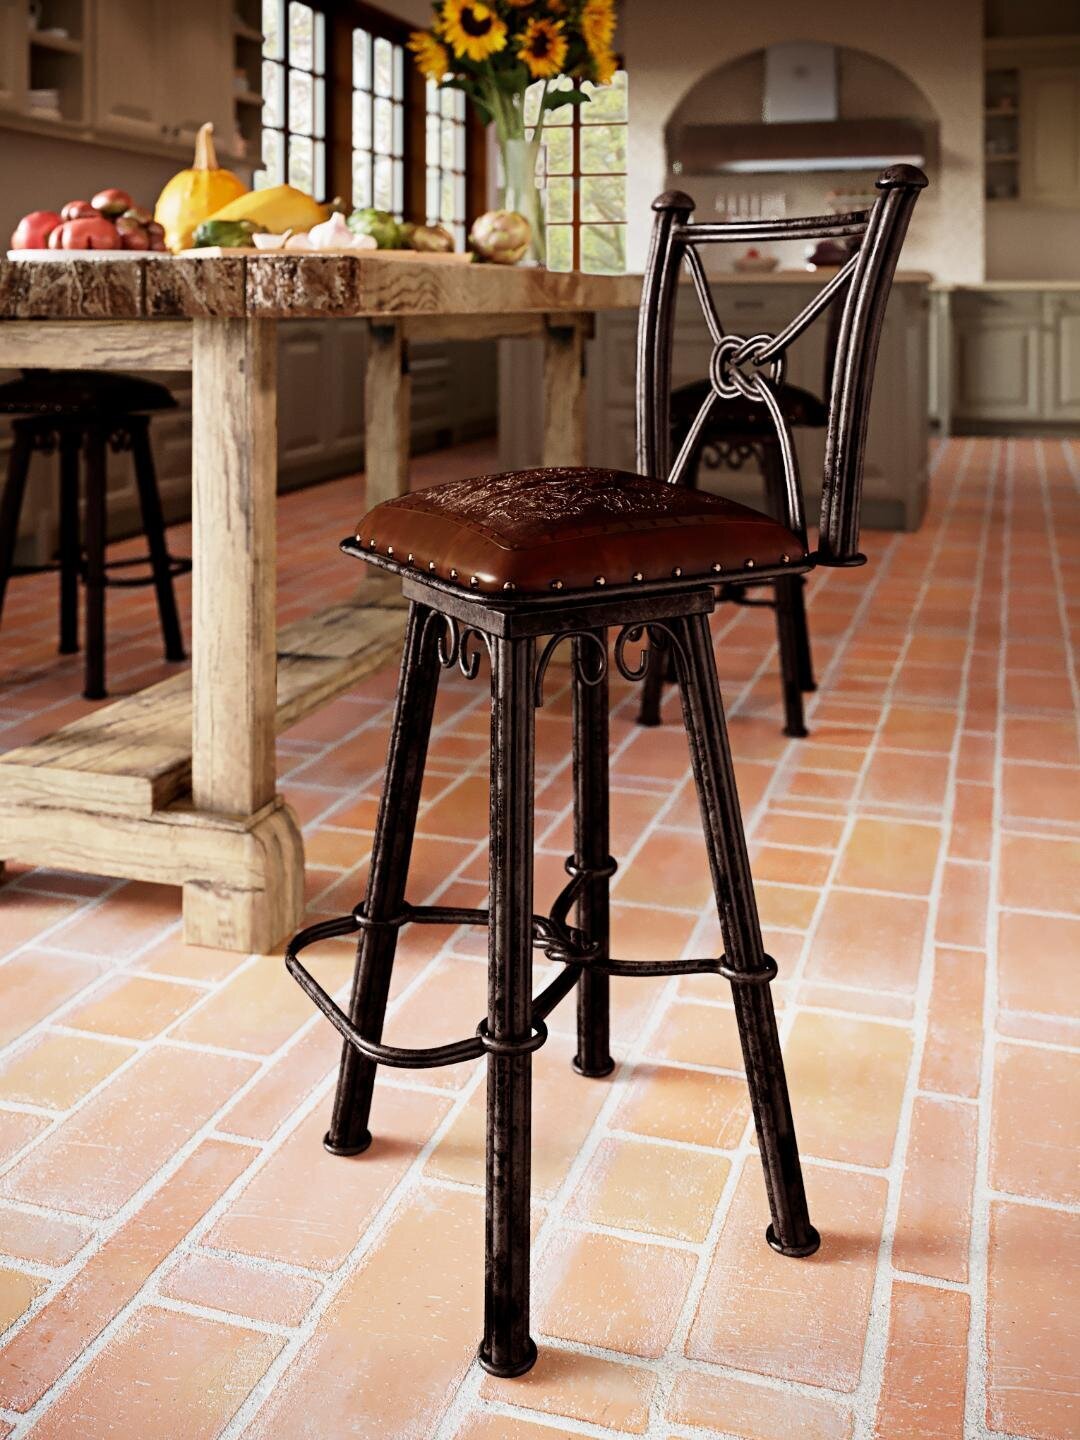 Antique Cast Iron Bar Stools With Square Seats